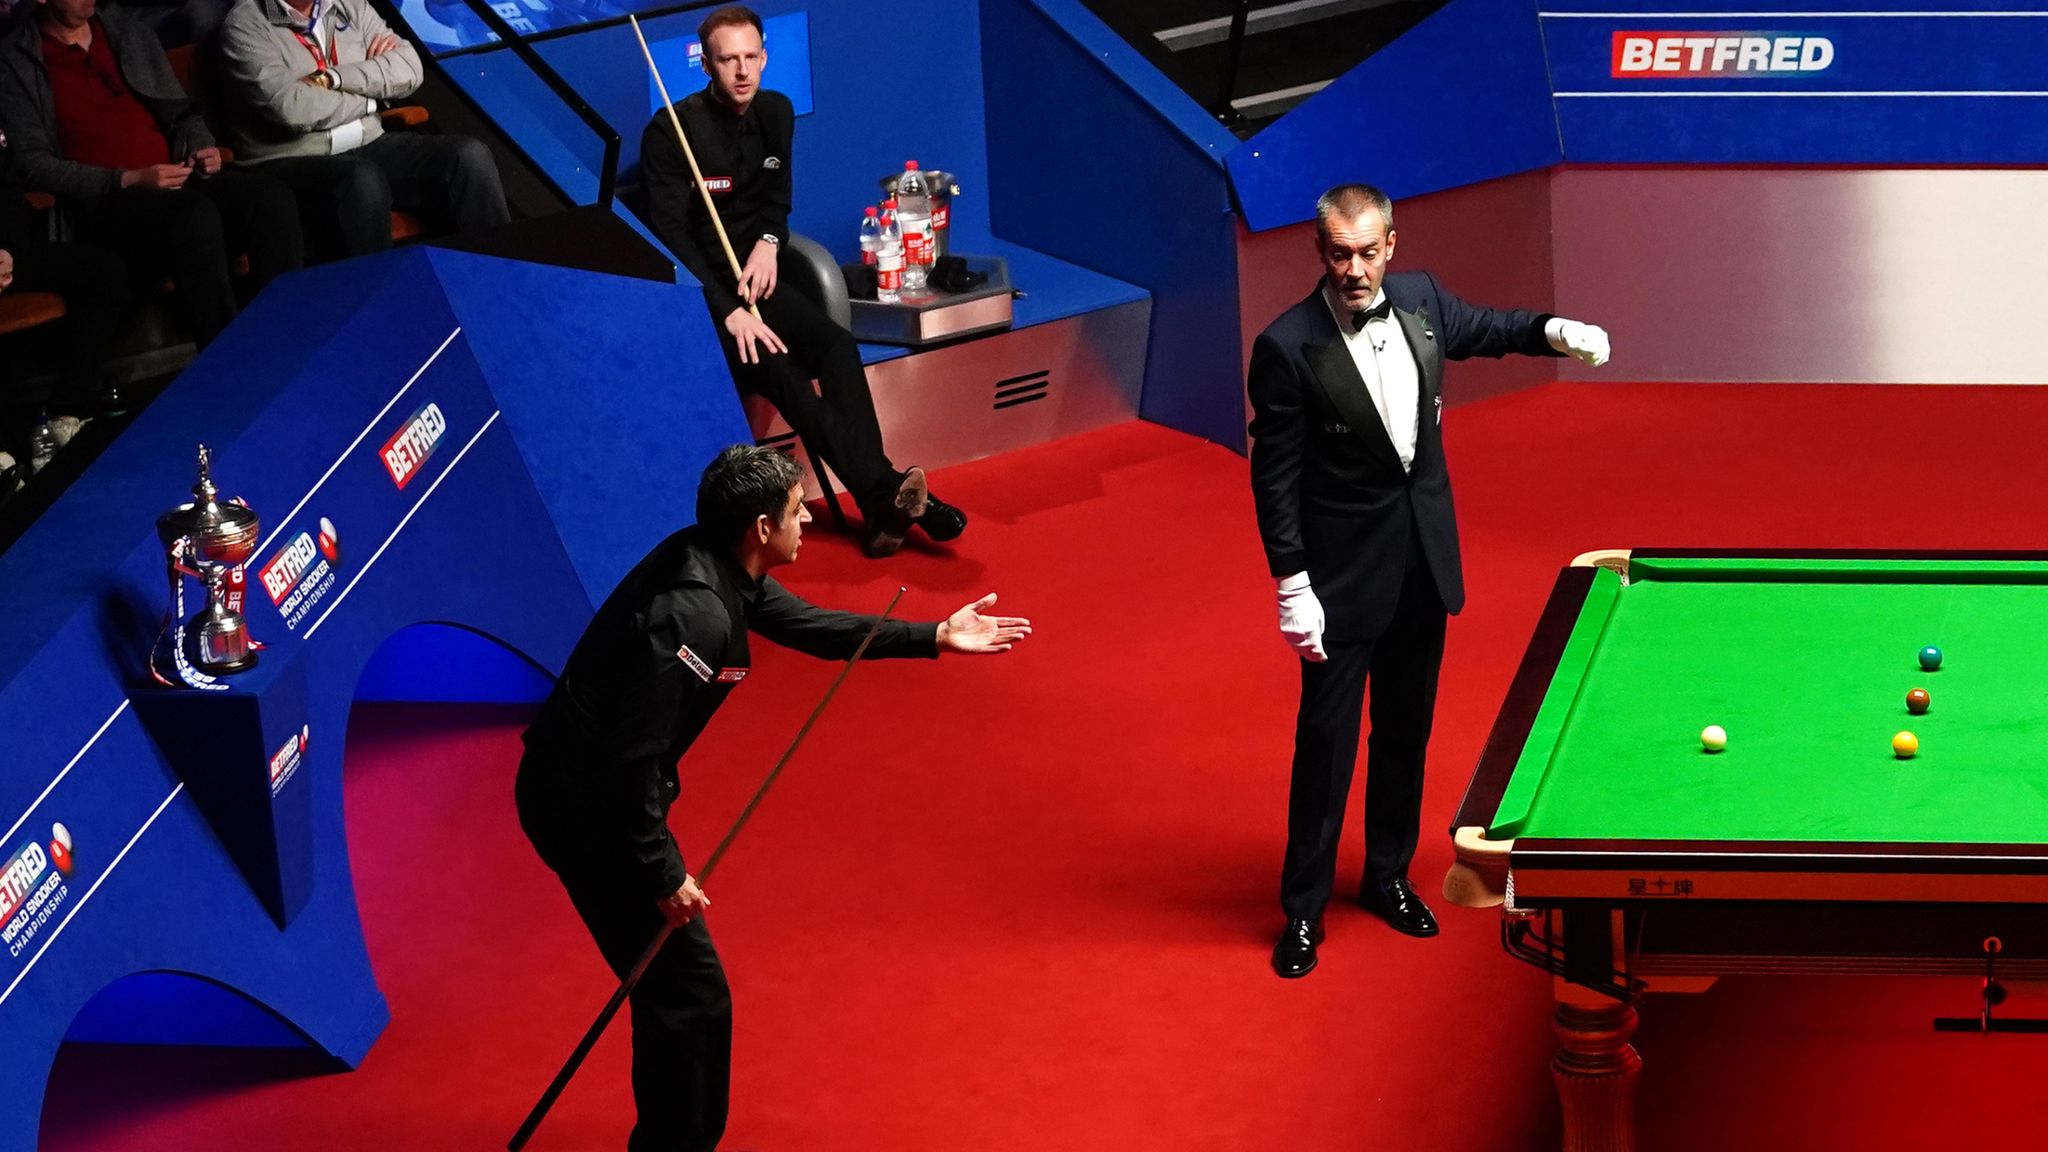 World Snooker Championship Judd Trump reduces Ronnie OSullivans advantage to set up thrilling Crucible finale Snooker News Sky Sports